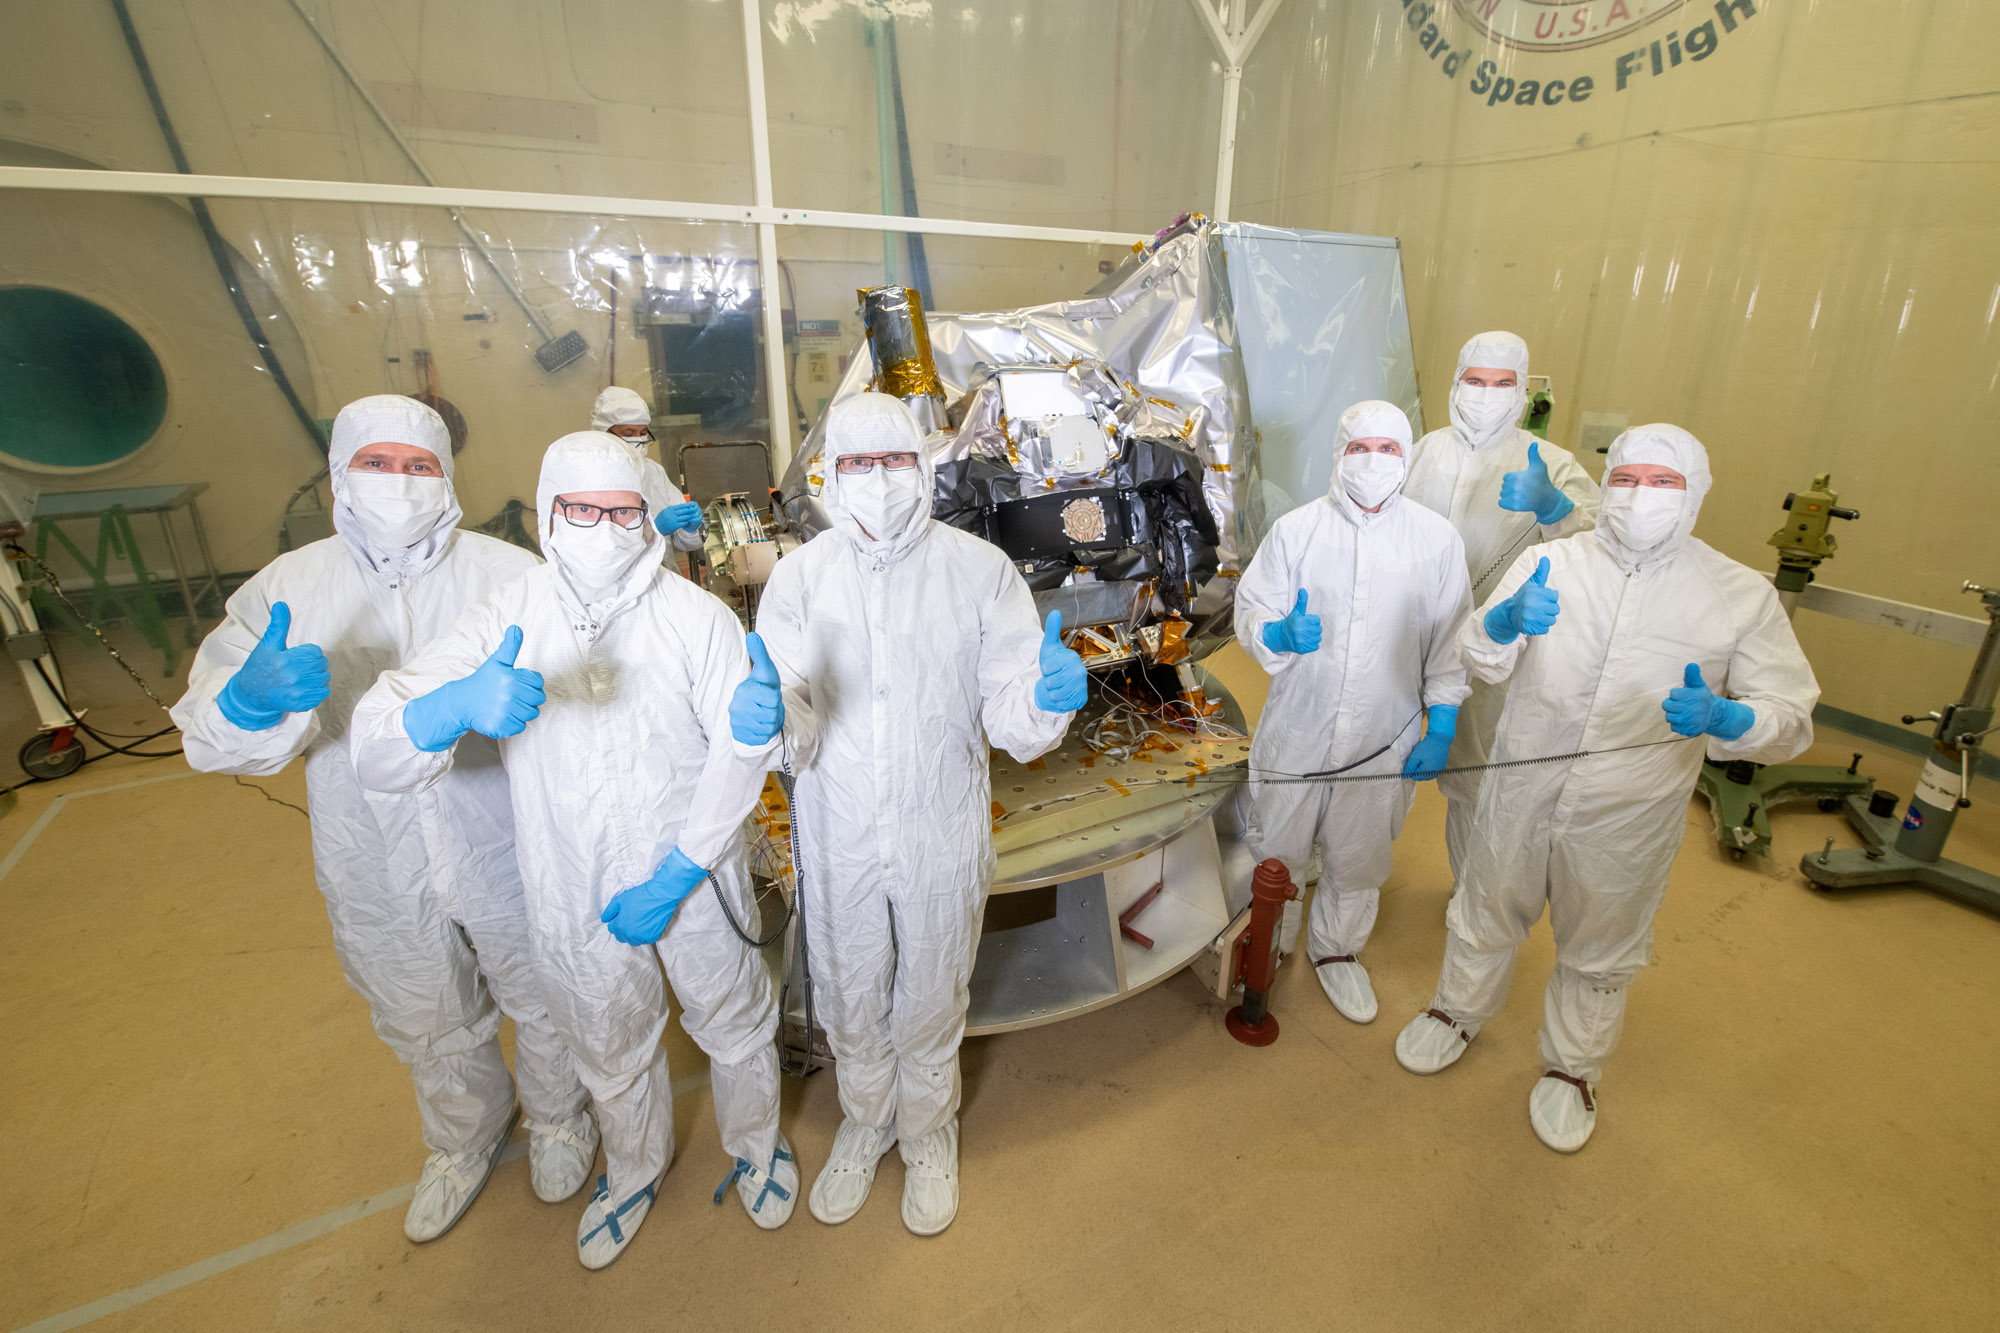 Ocean Color Instrument managers (Brian Clemons, Eric Gorman, Ulrik Gliese, Leland Chemerys, Joe Knuble, Robby Estep) pose with the instrument in the acoustic chamber.